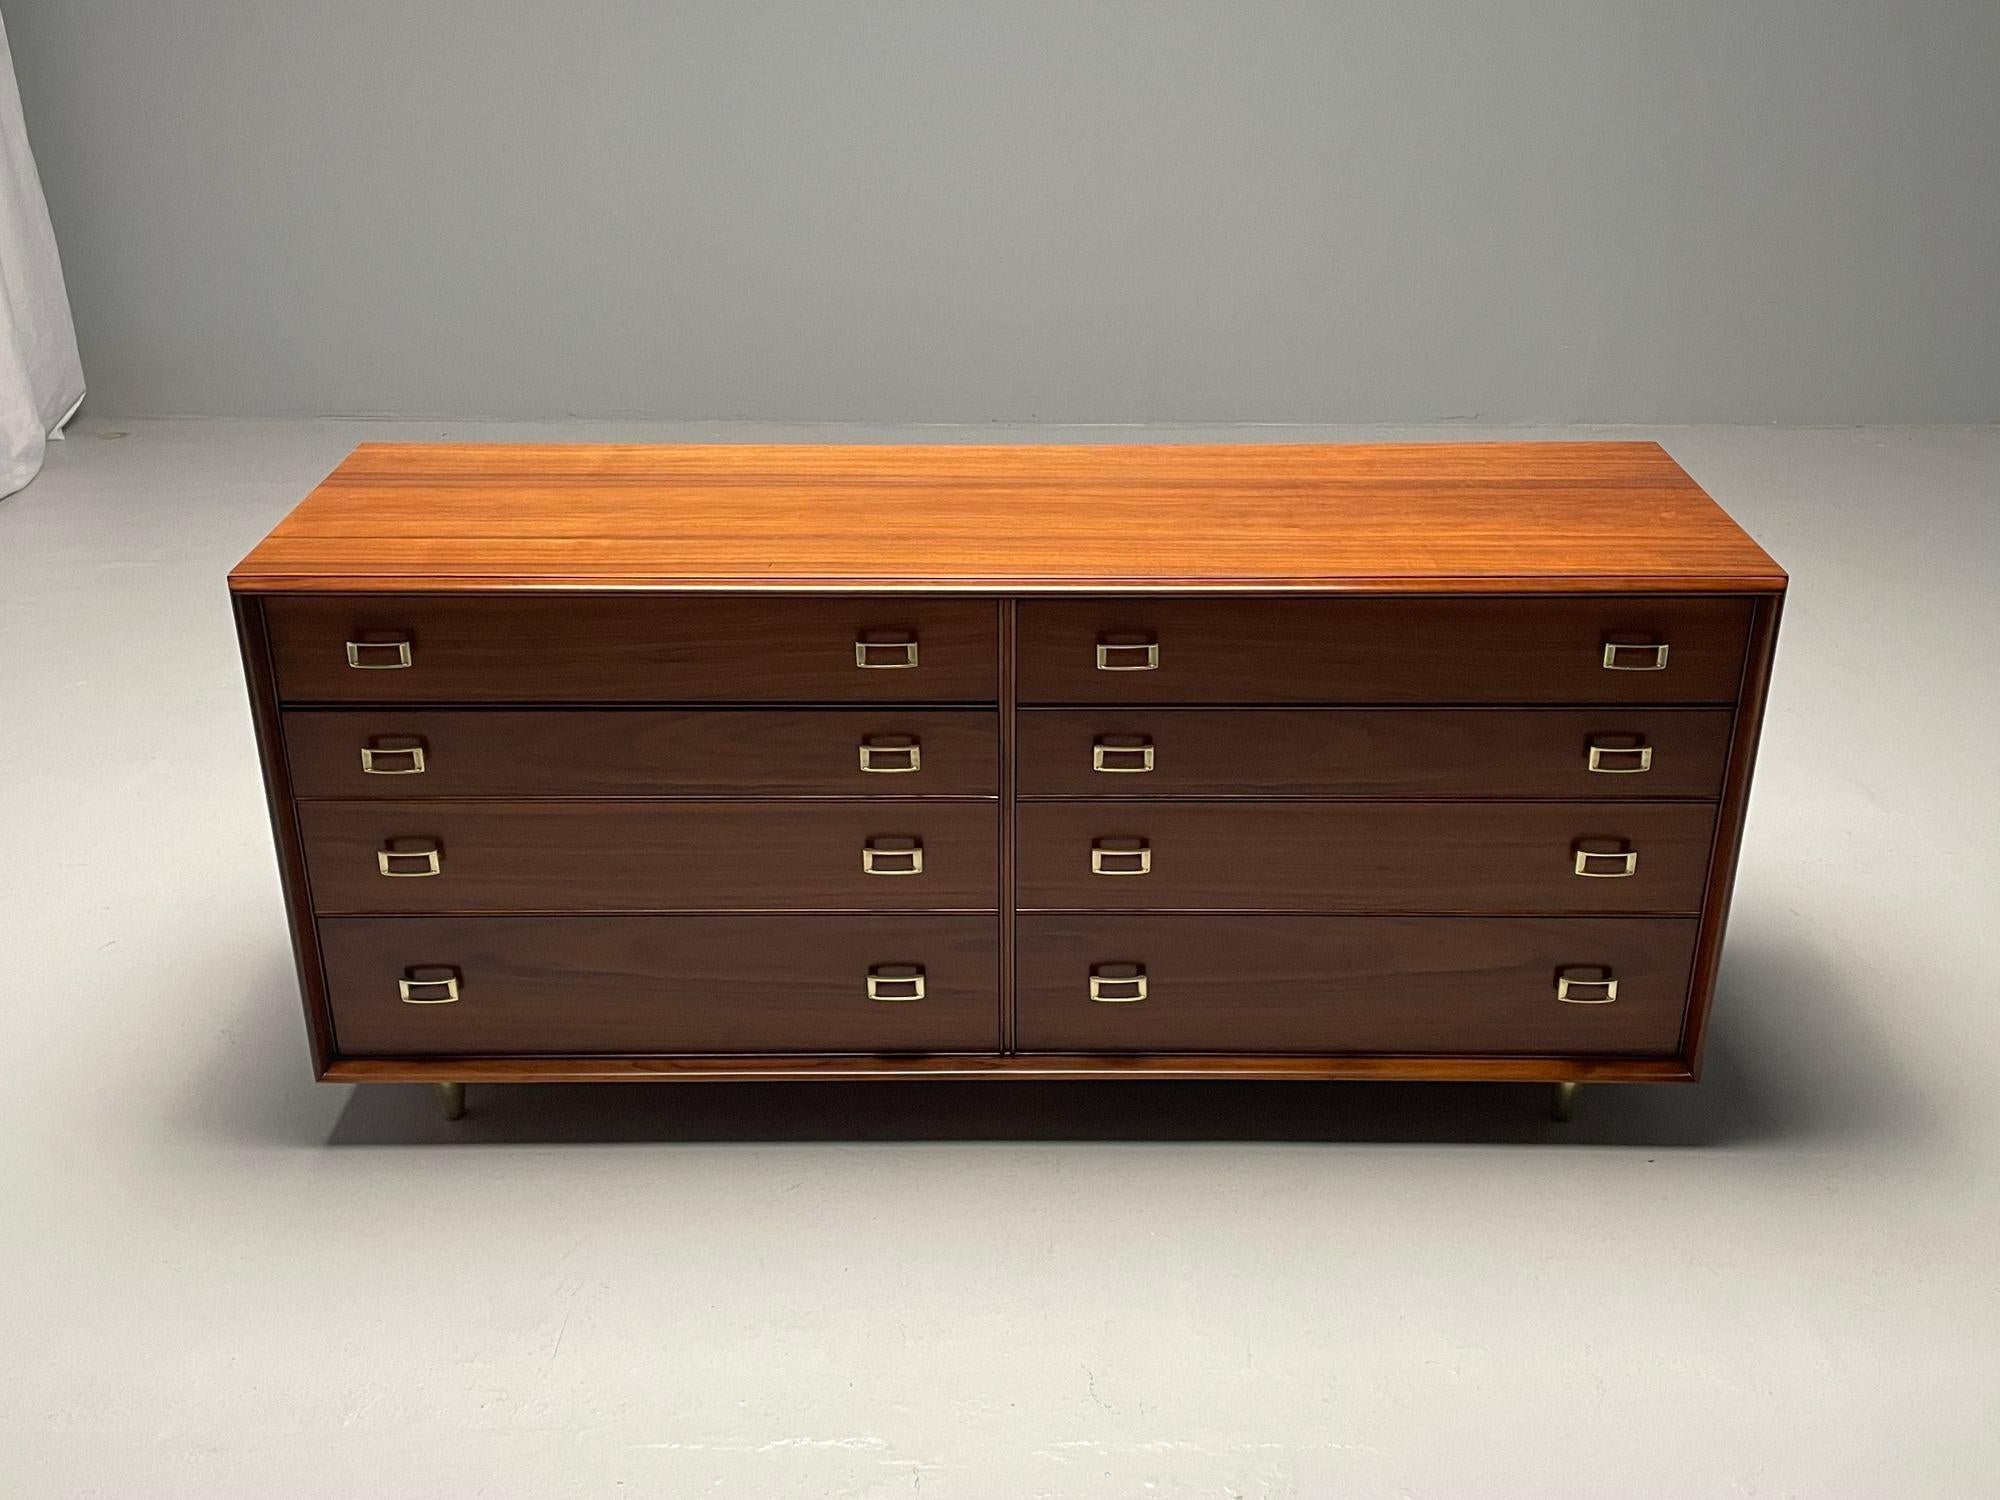 Paul Frankl, John Stuart, Mid-Century Modern, Dresser, Walnut, Brass, USA, 1950s

Fully refinished dresser designed by Paul Frankl for John Stuart. This cabinet has 8 drawers in total, four beside four of graduated heights, with brass drawer pulls.